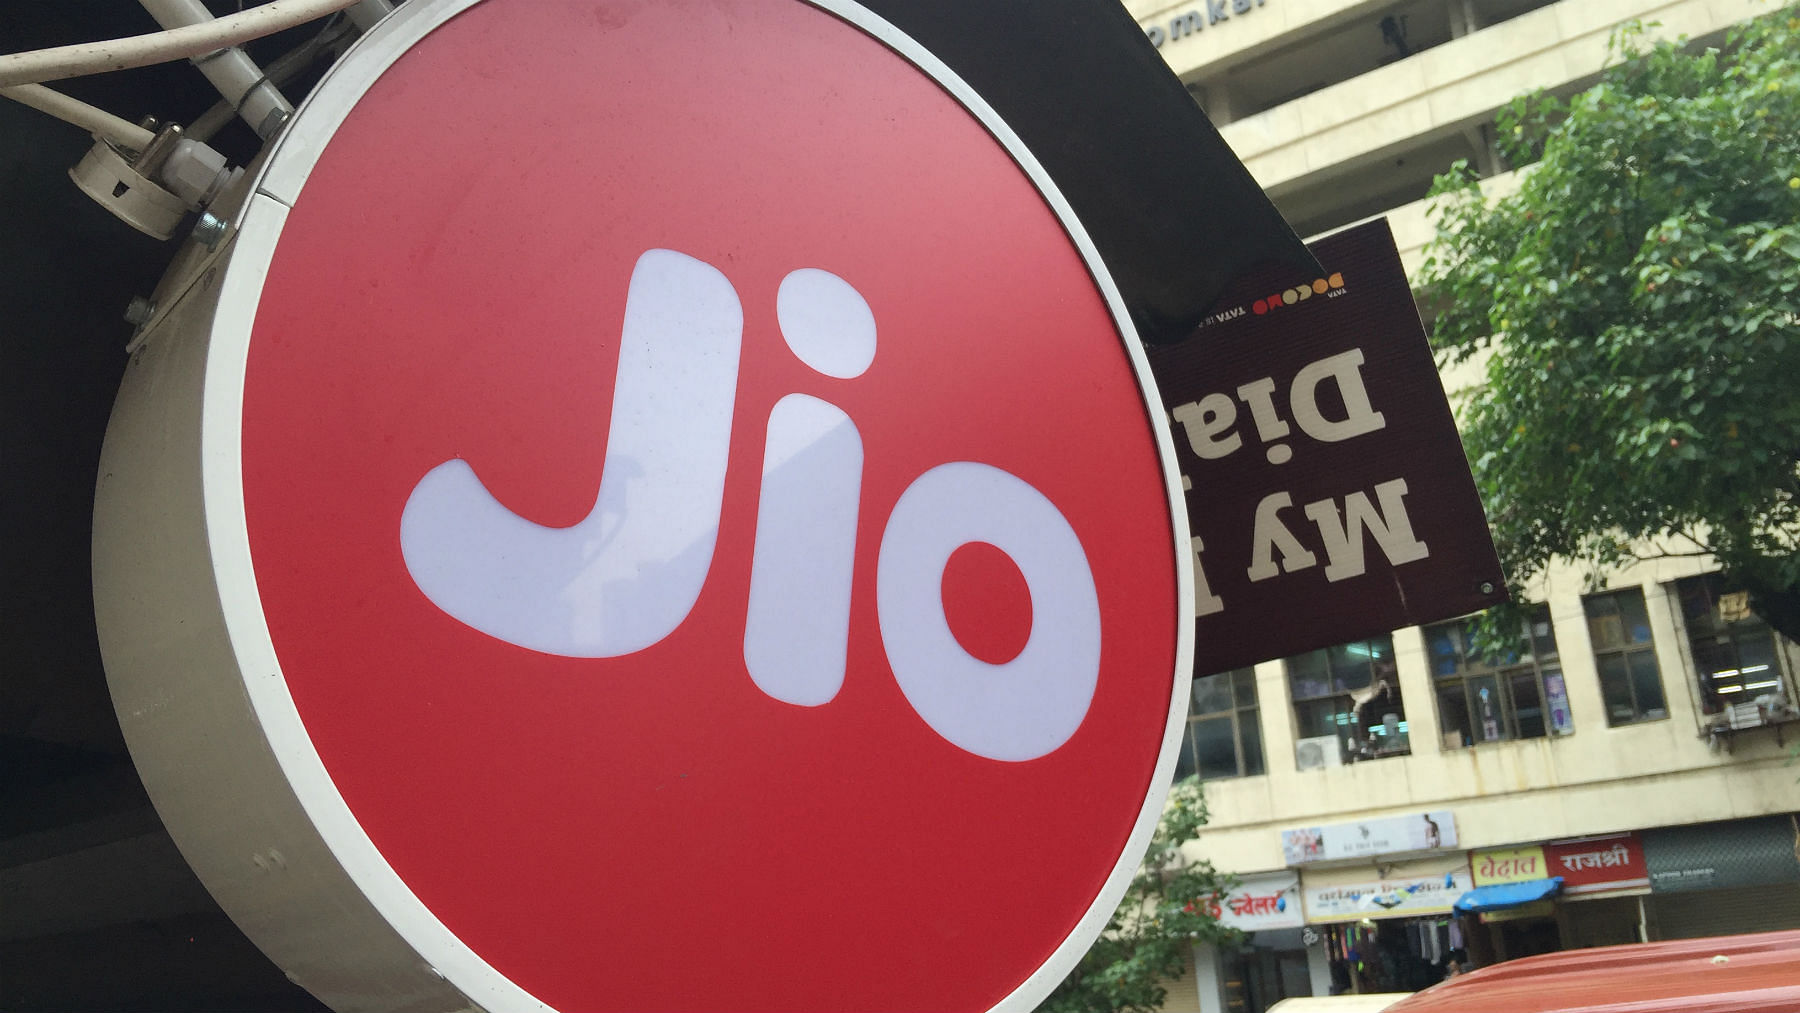 Can Reliance Jio repeat its 4G success with broadband? (Photo: <b>BloombergQuint</b>)